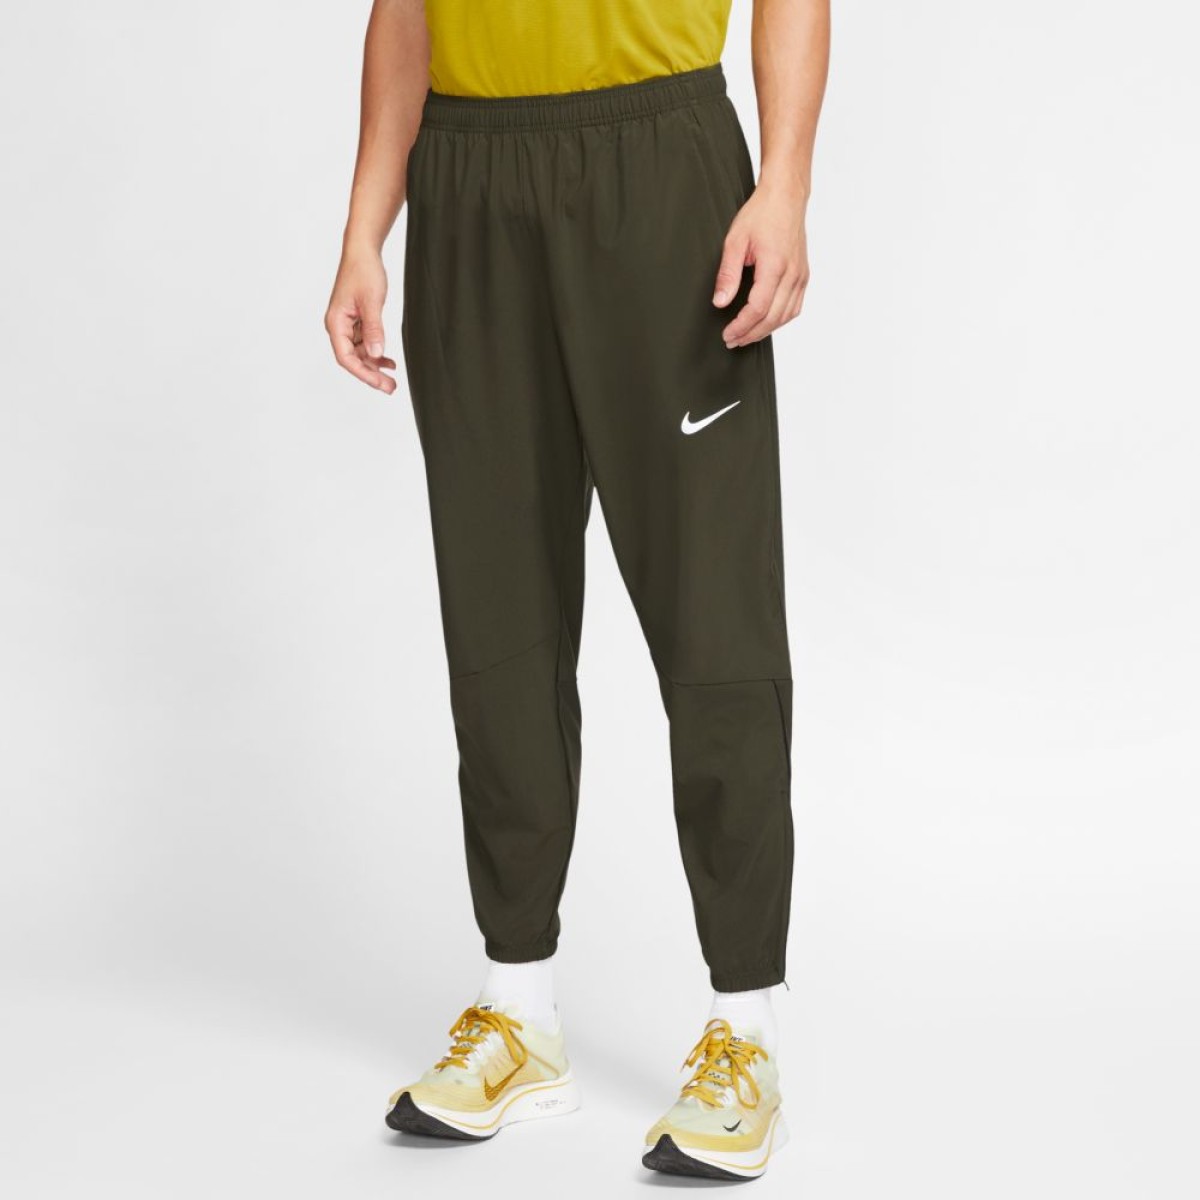 The Nike Essential Pants are your go-to for layering over shorts or ...